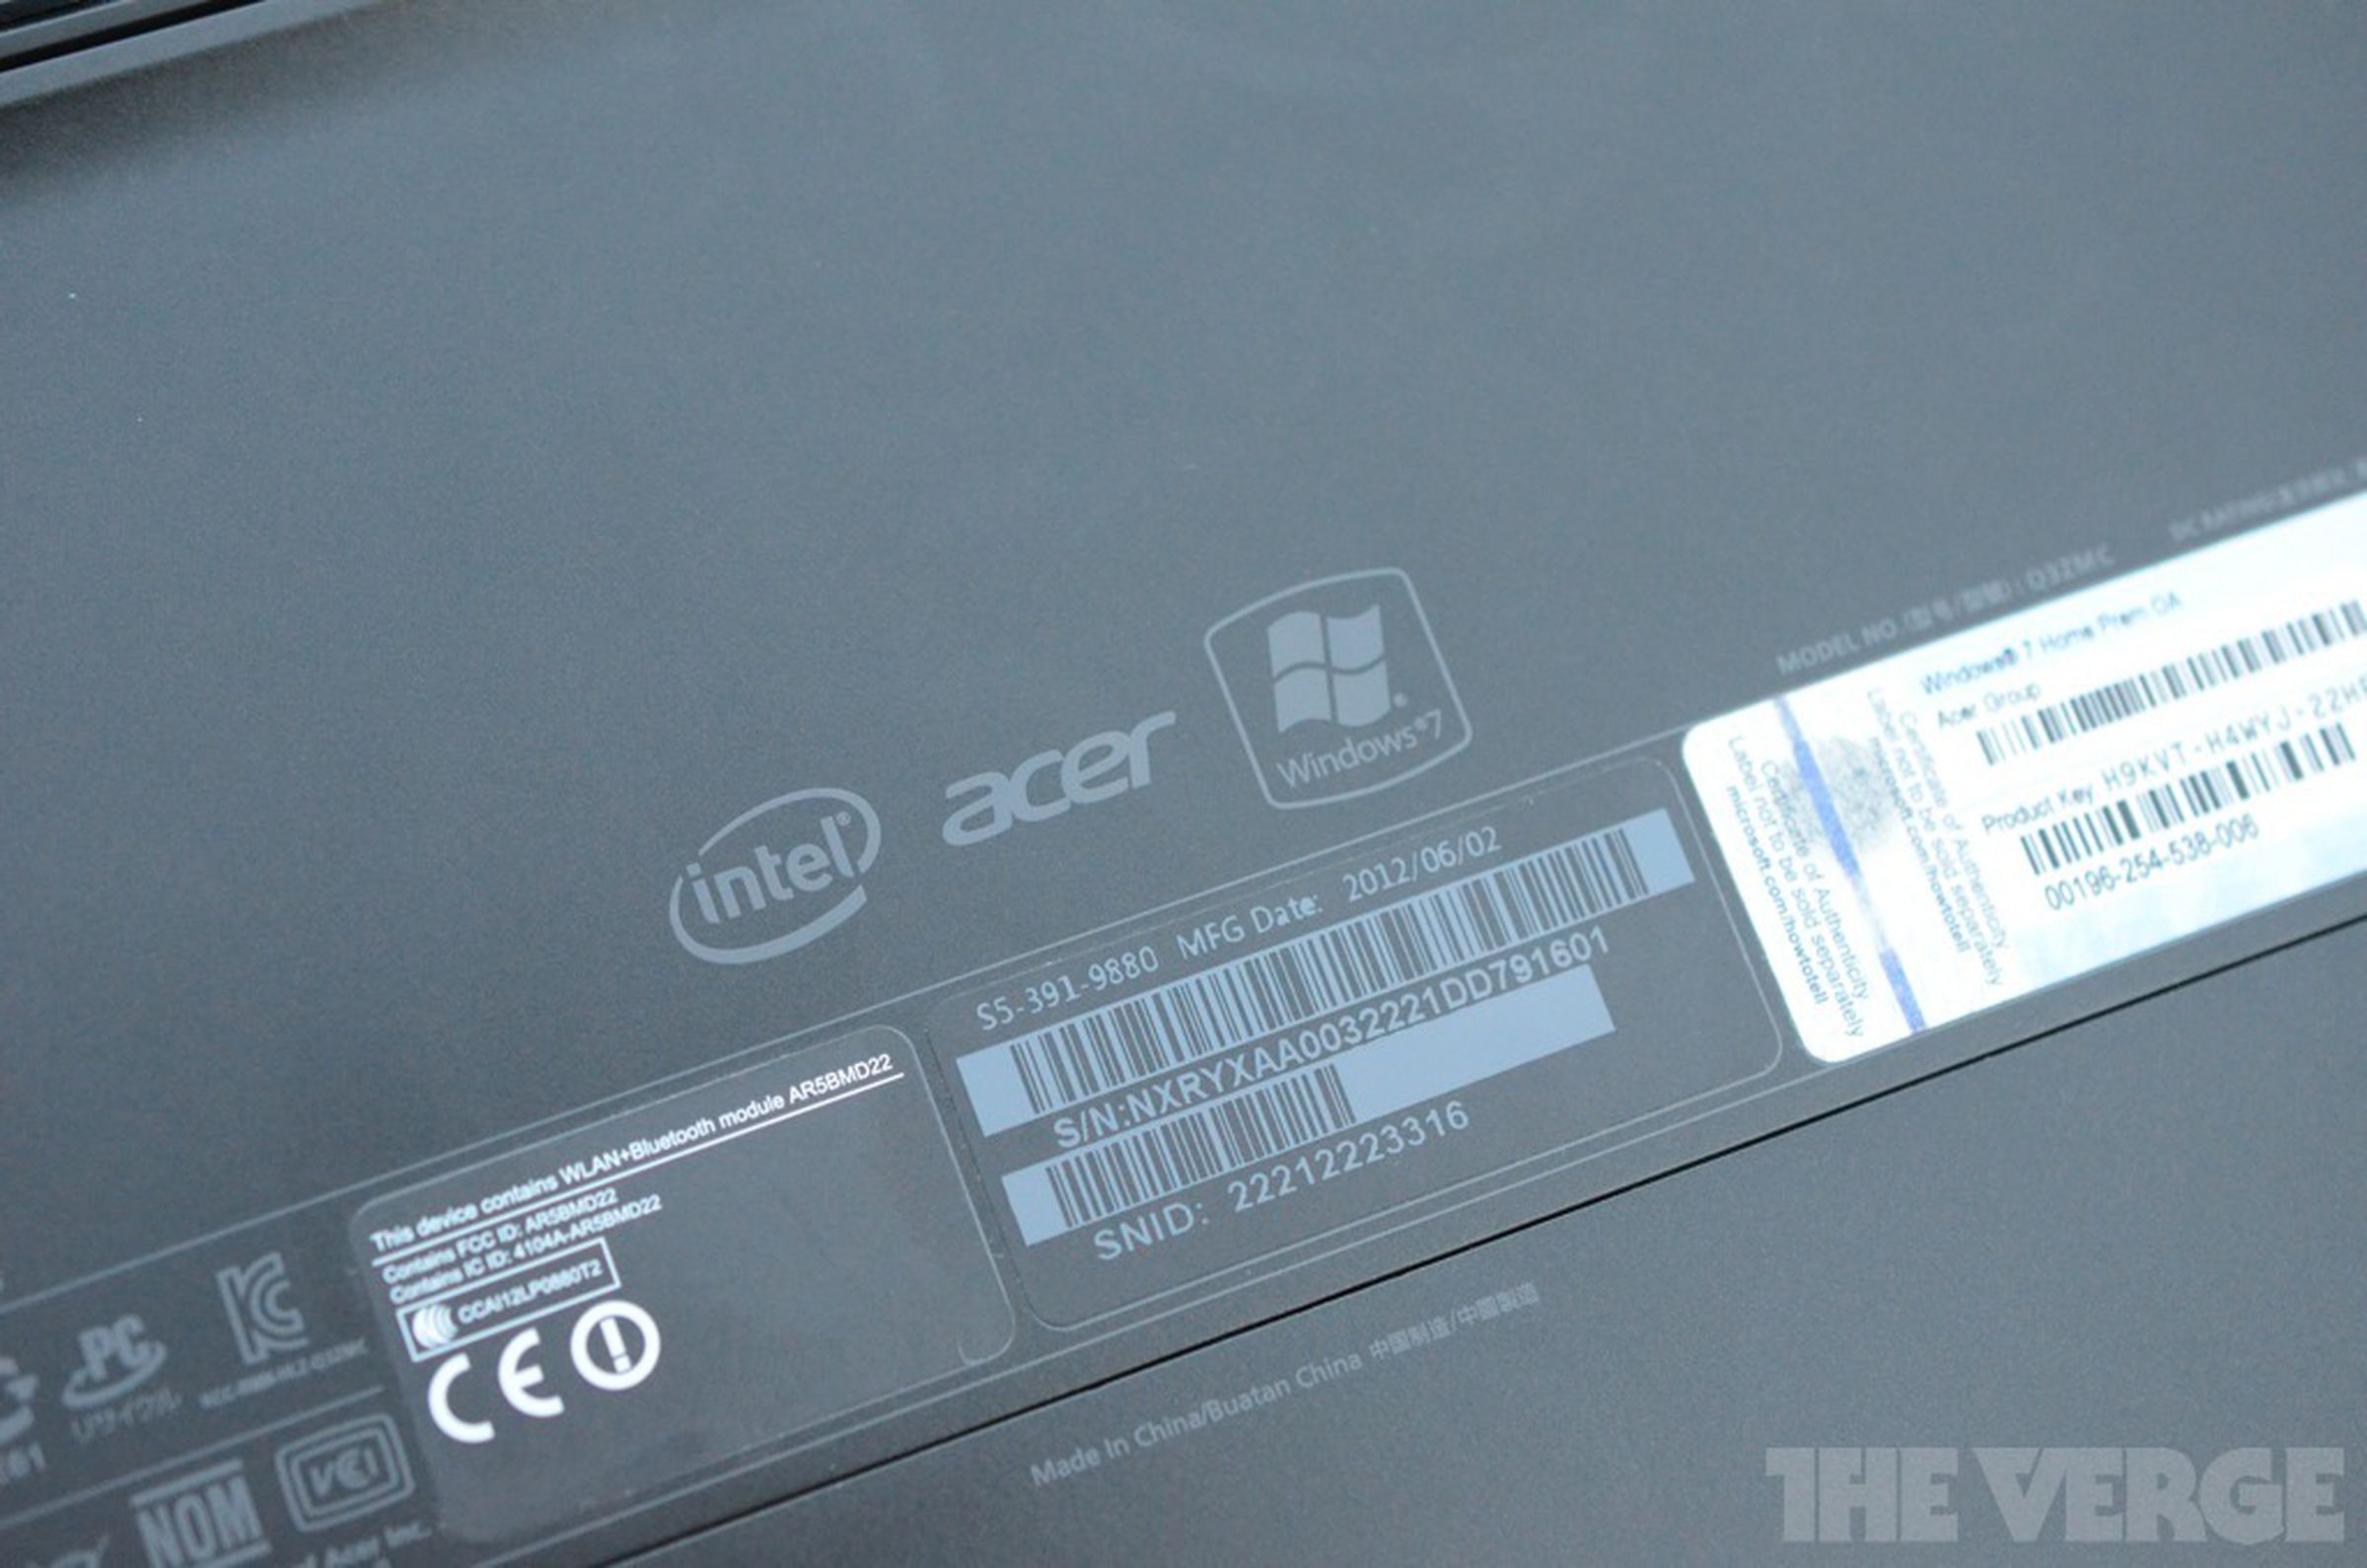 Acer Aspire S5 review pictures